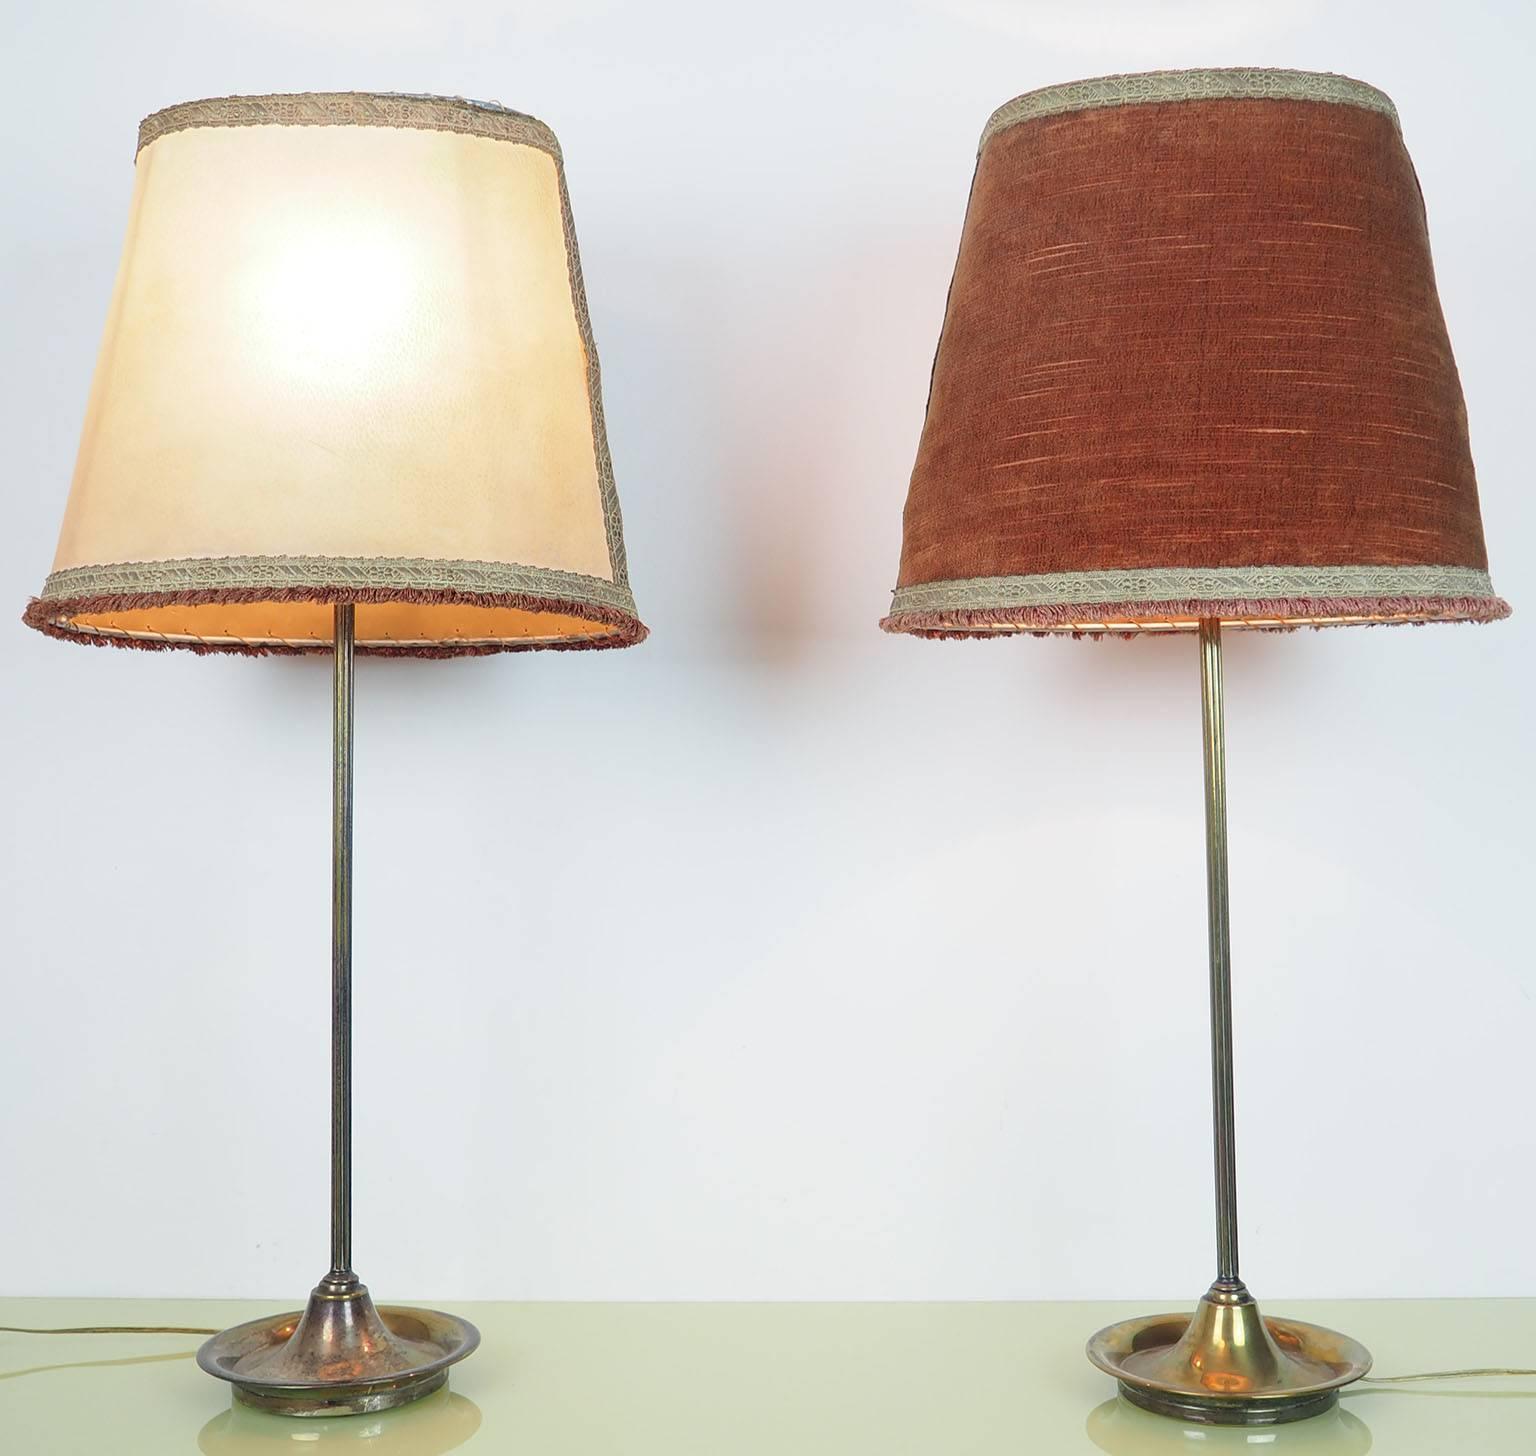 Mid-Century Modern Pair of Large Table Lamps Brass with Bifronte lampshades by Chiarini Milano 1950